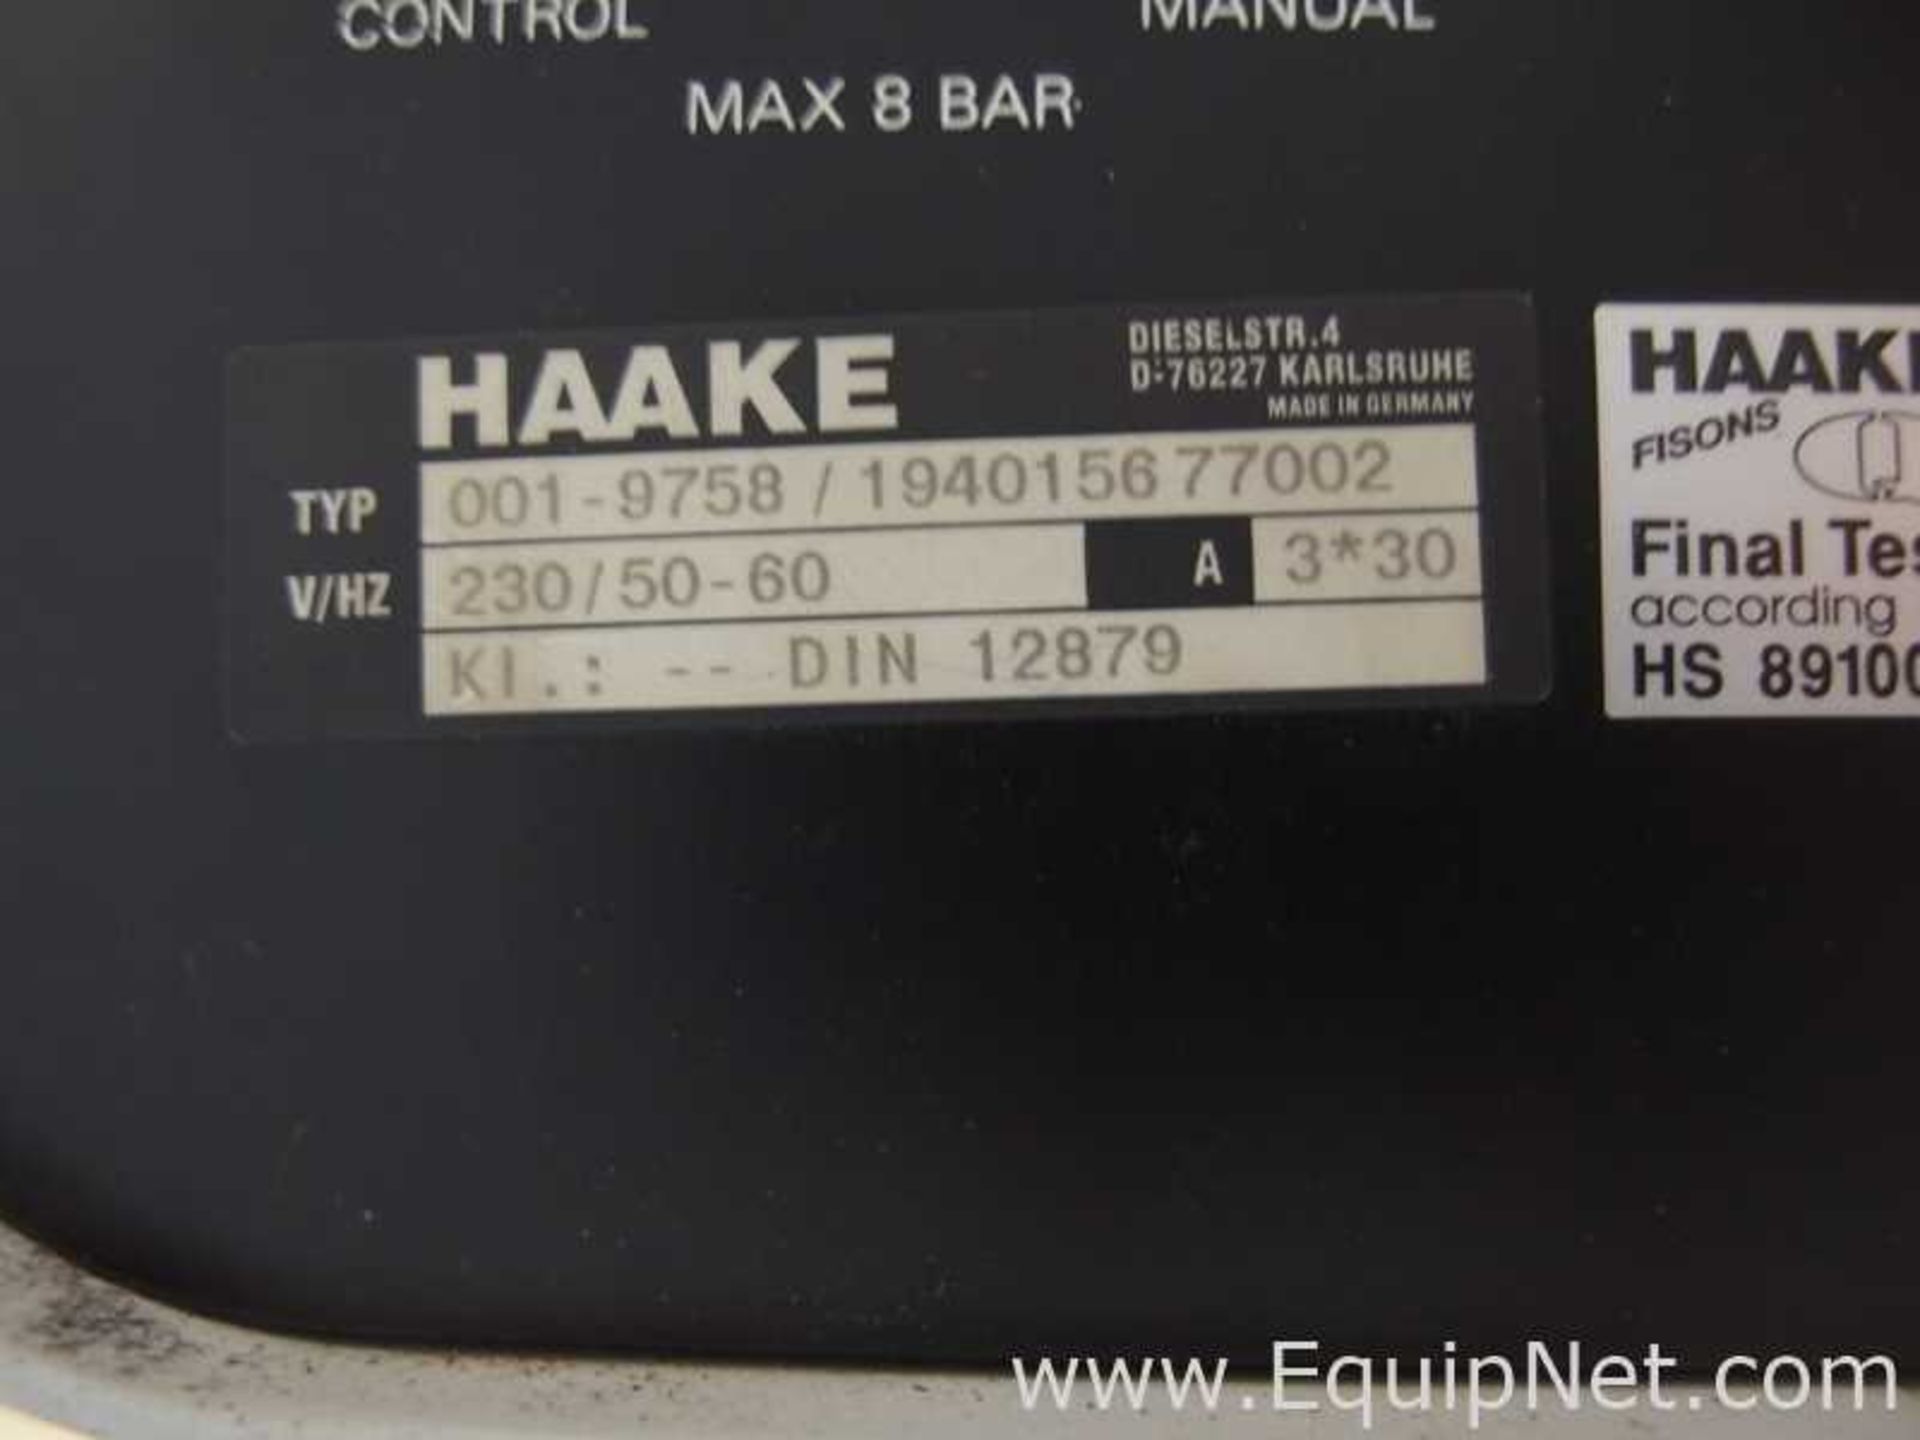 Haake Type 001-9758/194015677002 Lab System With Rheomix 600 Mixer - Image 8 of 18